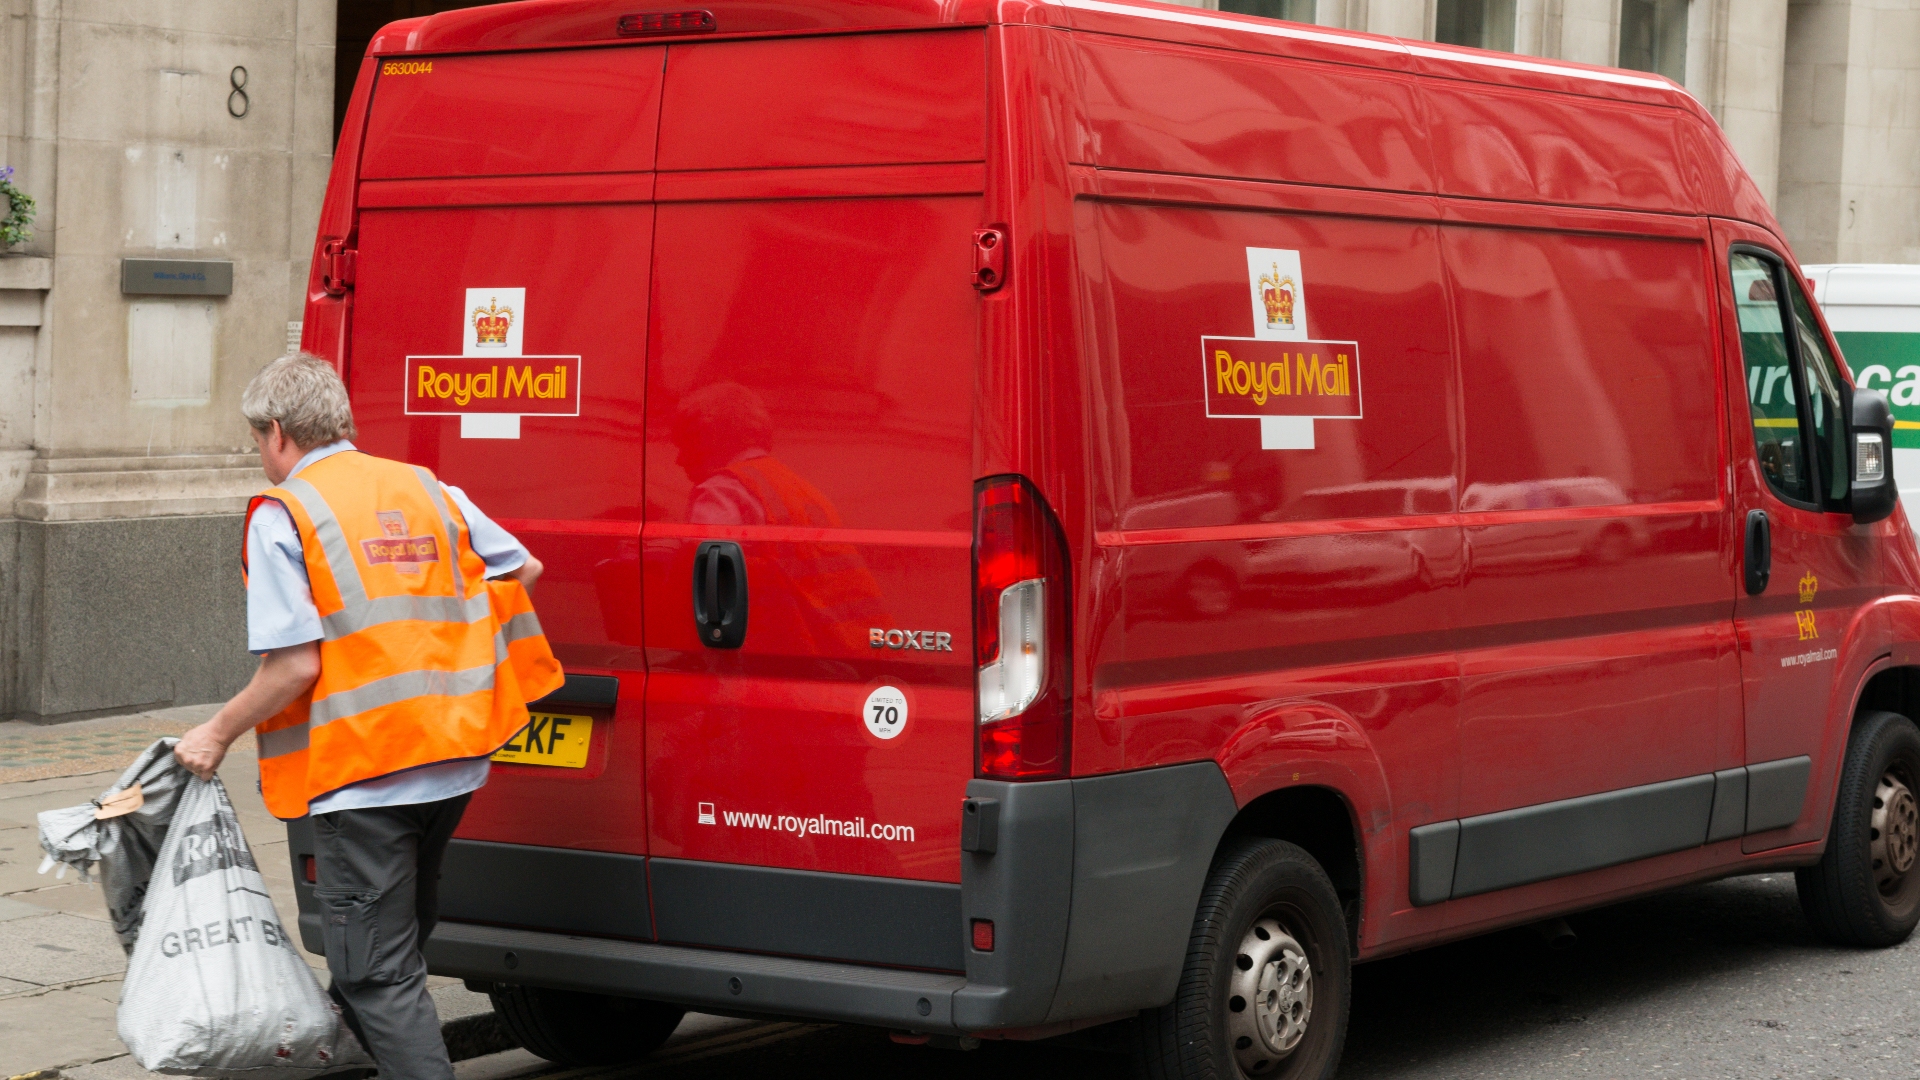 The committee said Royal Mail 'systemically failed to deliver' parts of its USO